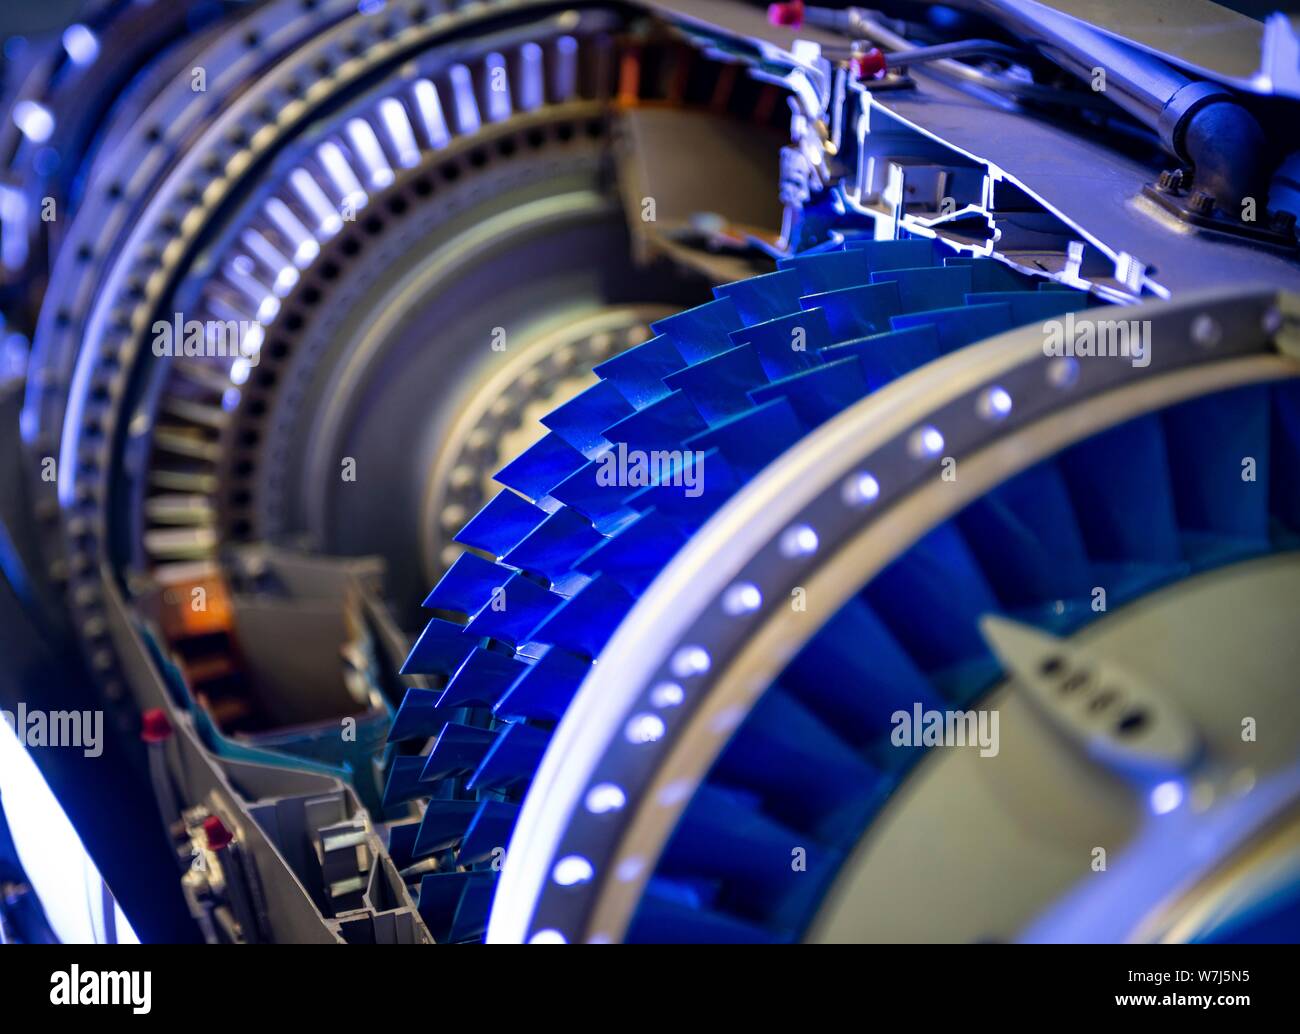 Gas turbine, engine helicopter, view inside the engine, compressor, combustion chamber and turbine, exhibit, Paris, France Stock Photo